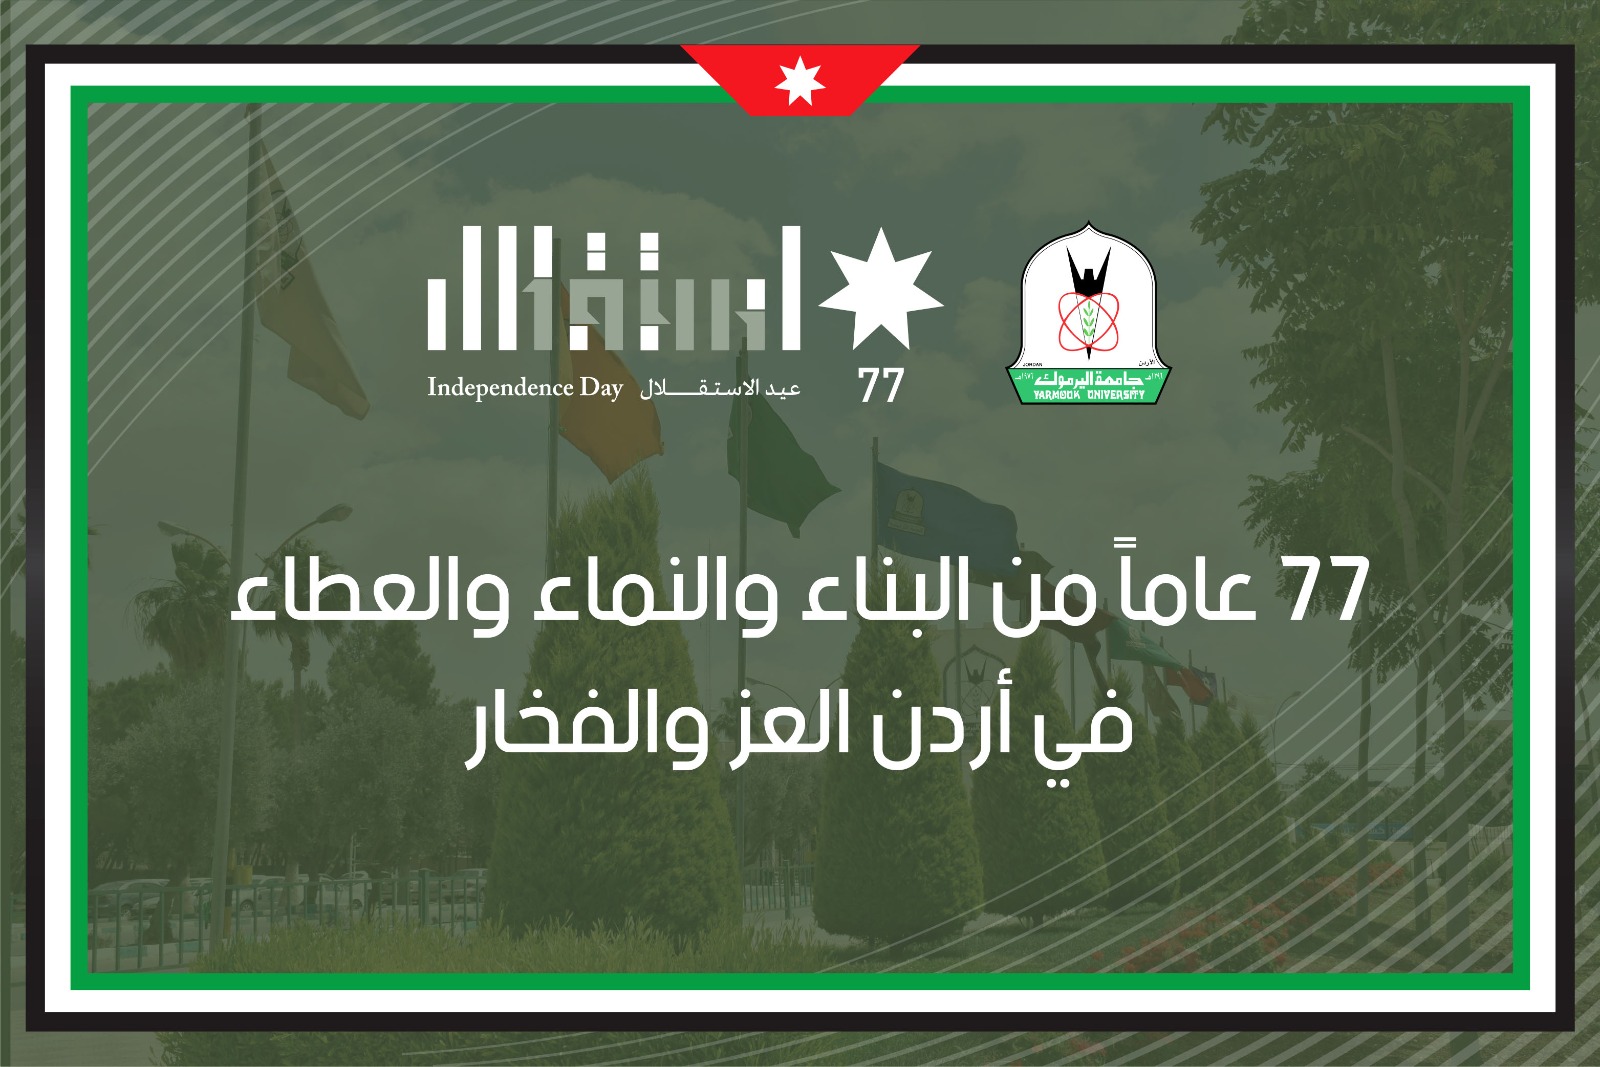 Congratulations from Yarmouk on the 77th Independence Day